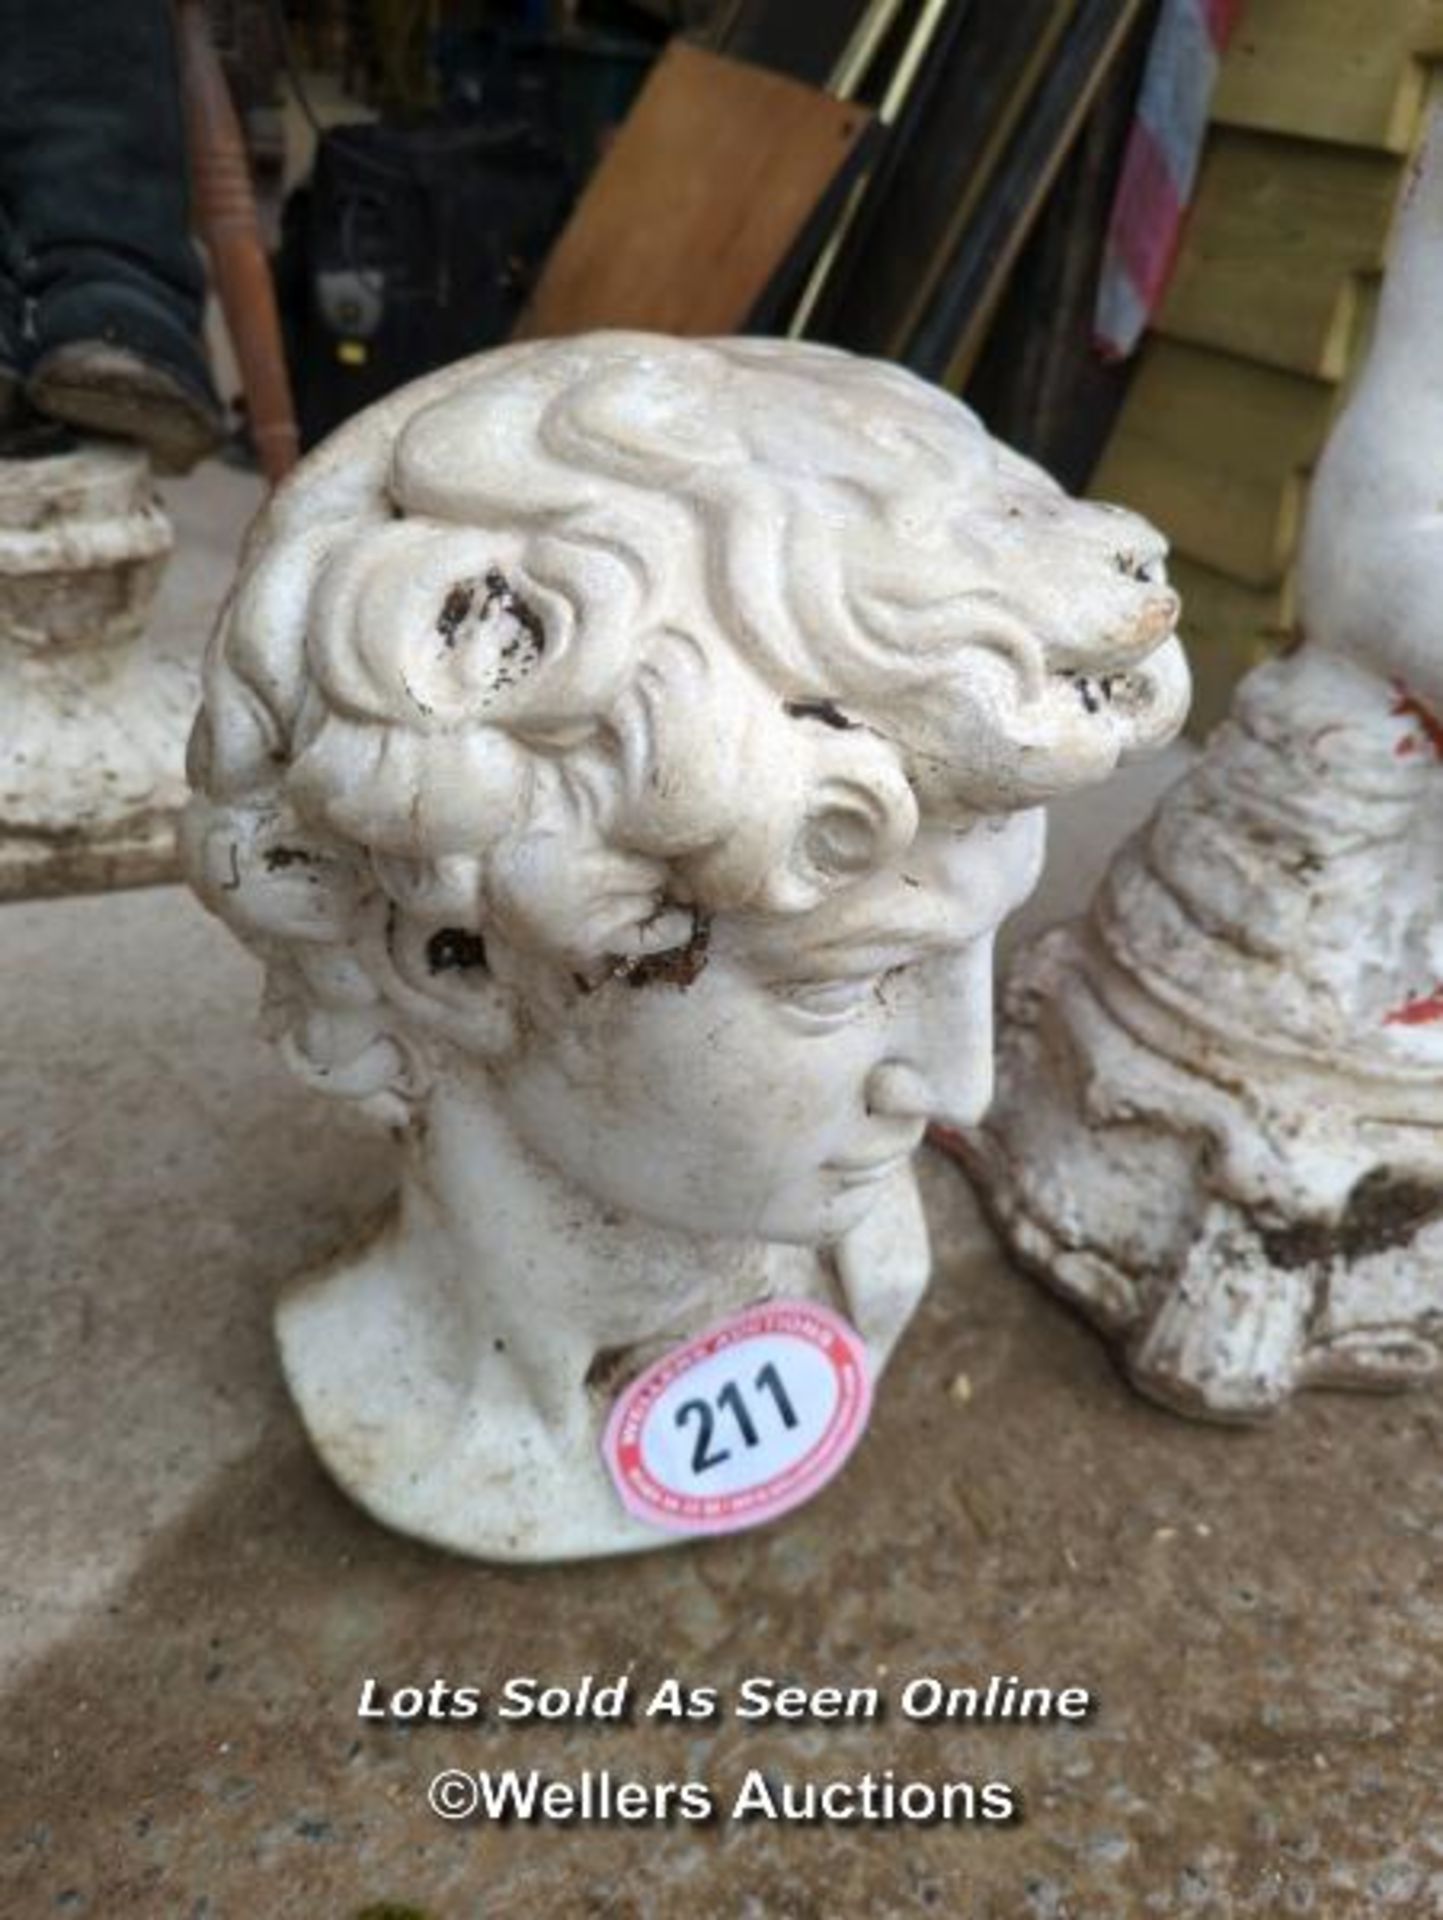 *CONCRETE BUST OF A ROMAN, 18 INCHES HIGH / ALL LOTS ARE LOCATED AT AUTHENTIC RECLAMATION TN5 7EF